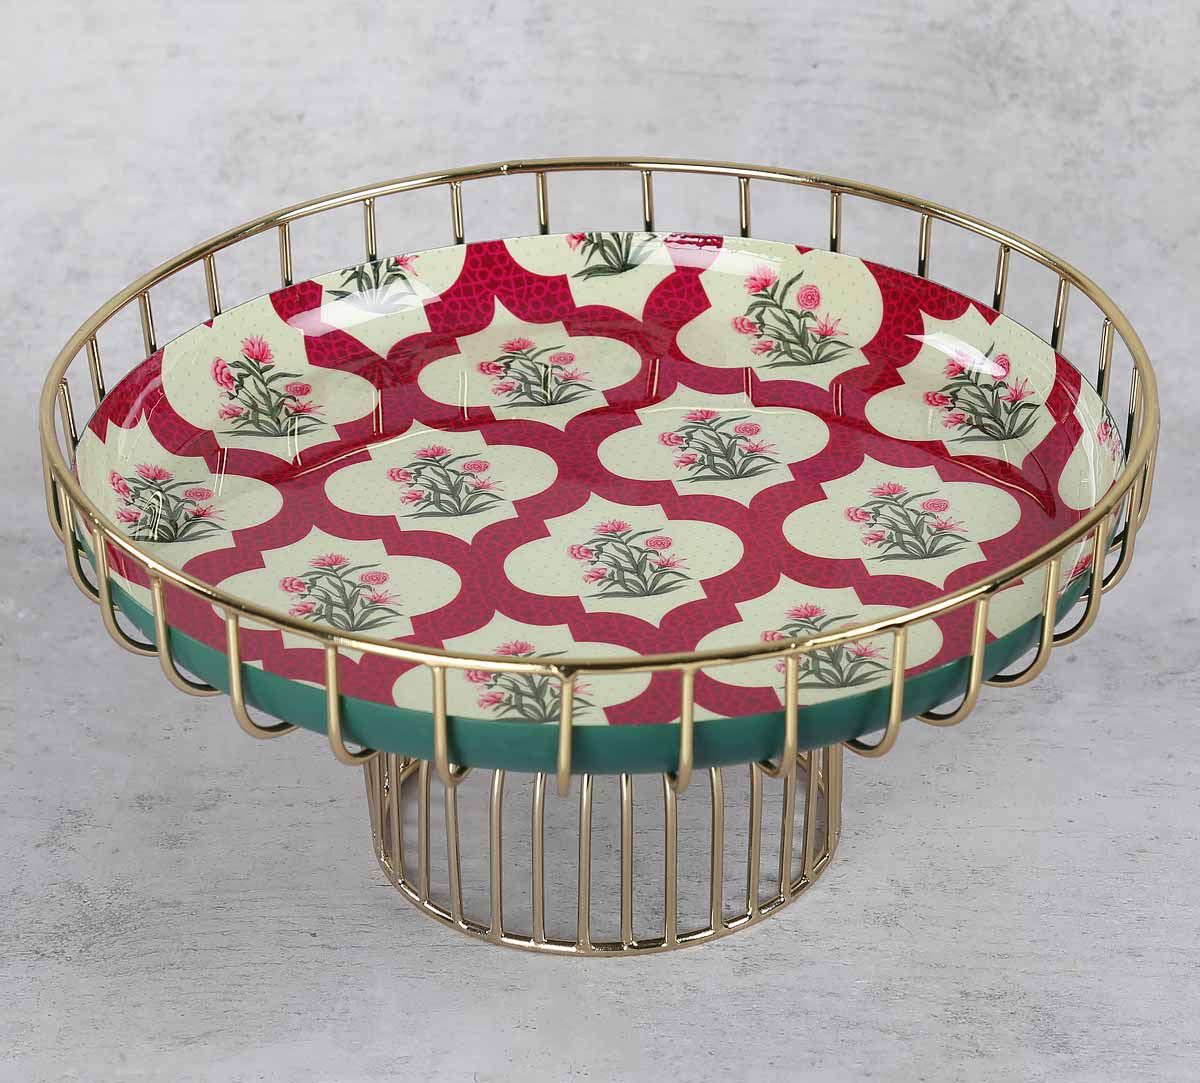 BAKER'S CUTLERY™ Ceramic Cake Stand Dessert Display Cage Shape Design  Cupcake Stands for Wedding Birthday Party Celebration - Baker's Cutlery